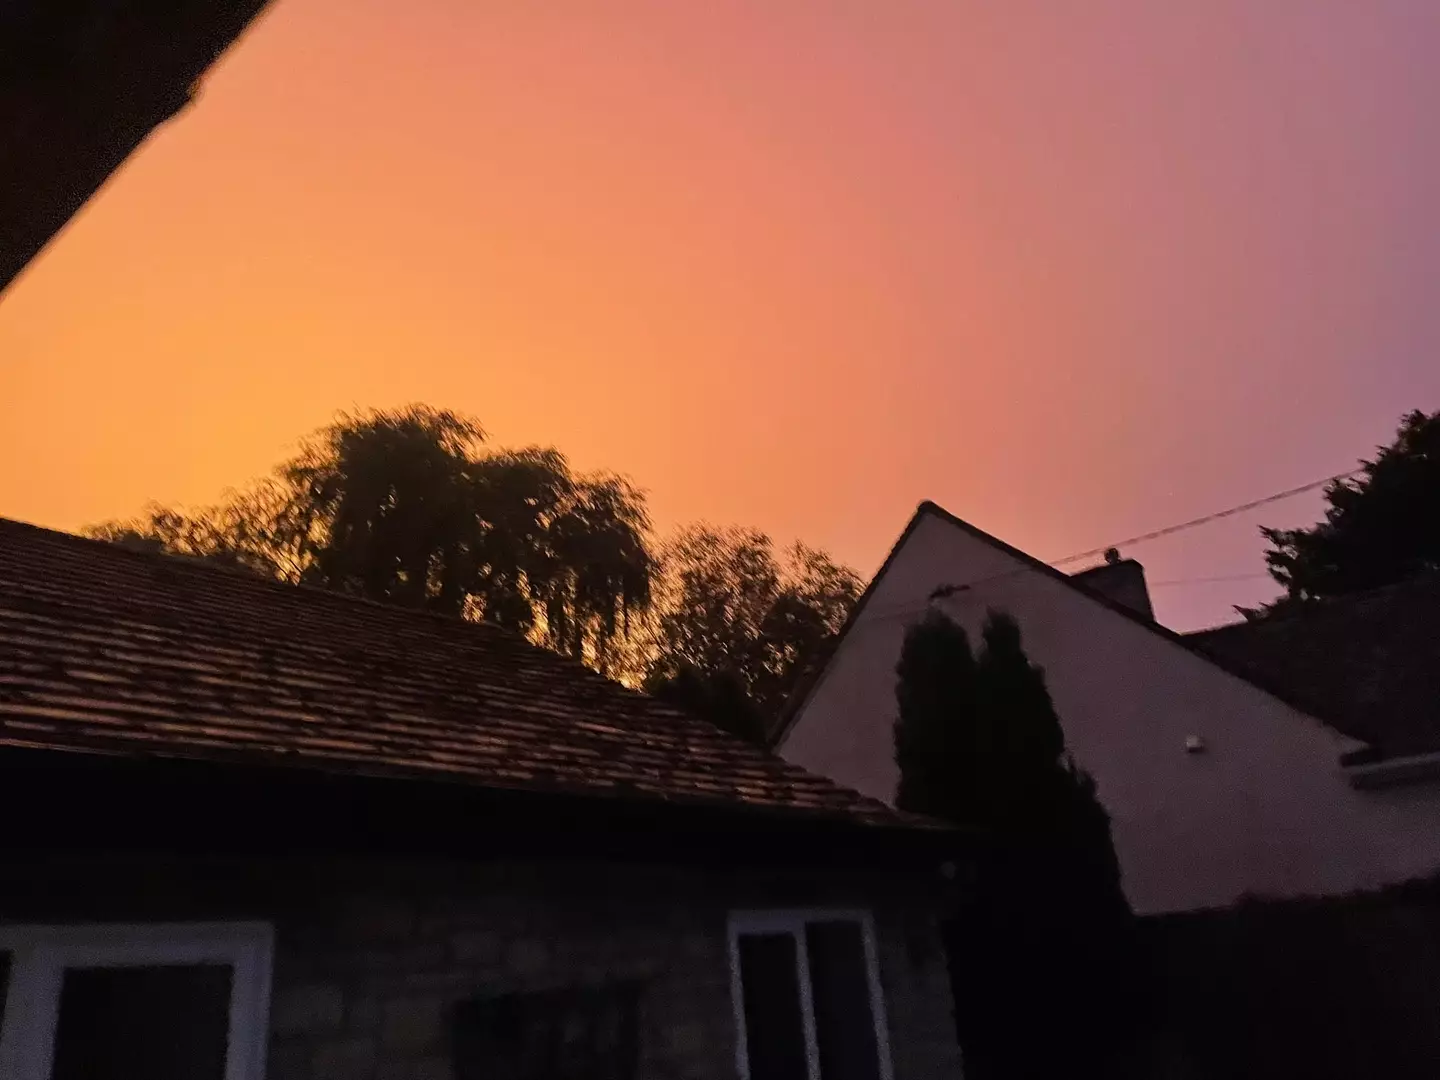 The fireball caused by the lightning strike lit up the sky.